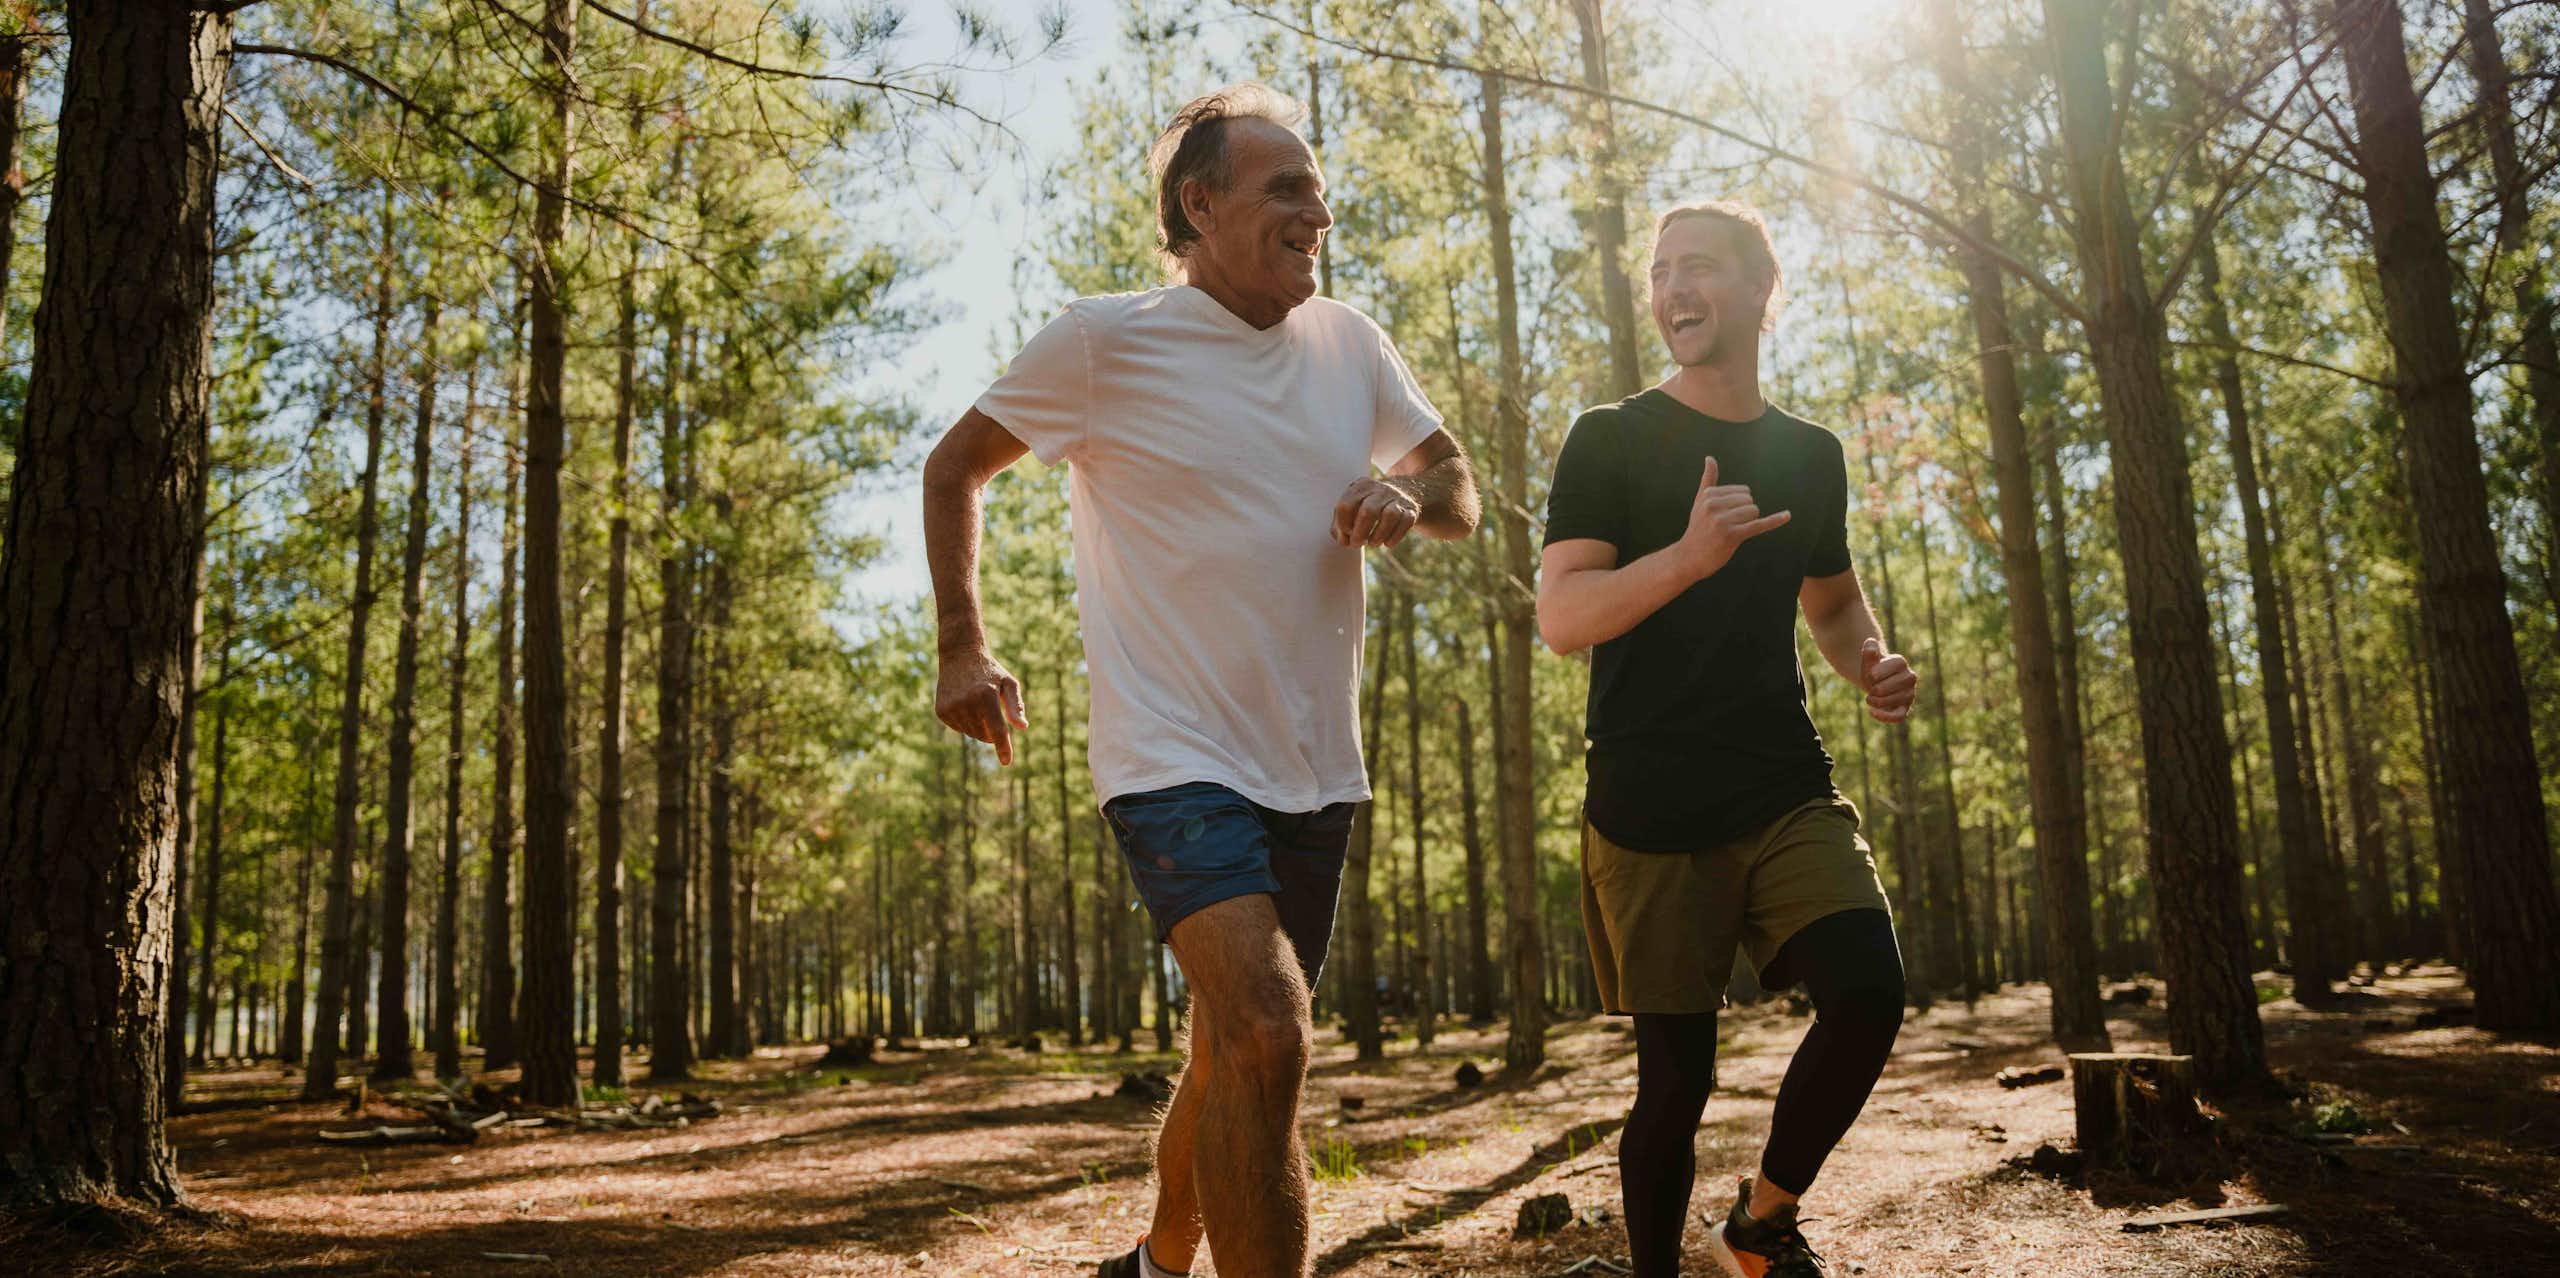 An older man and a younger man jogging happily in bushland.